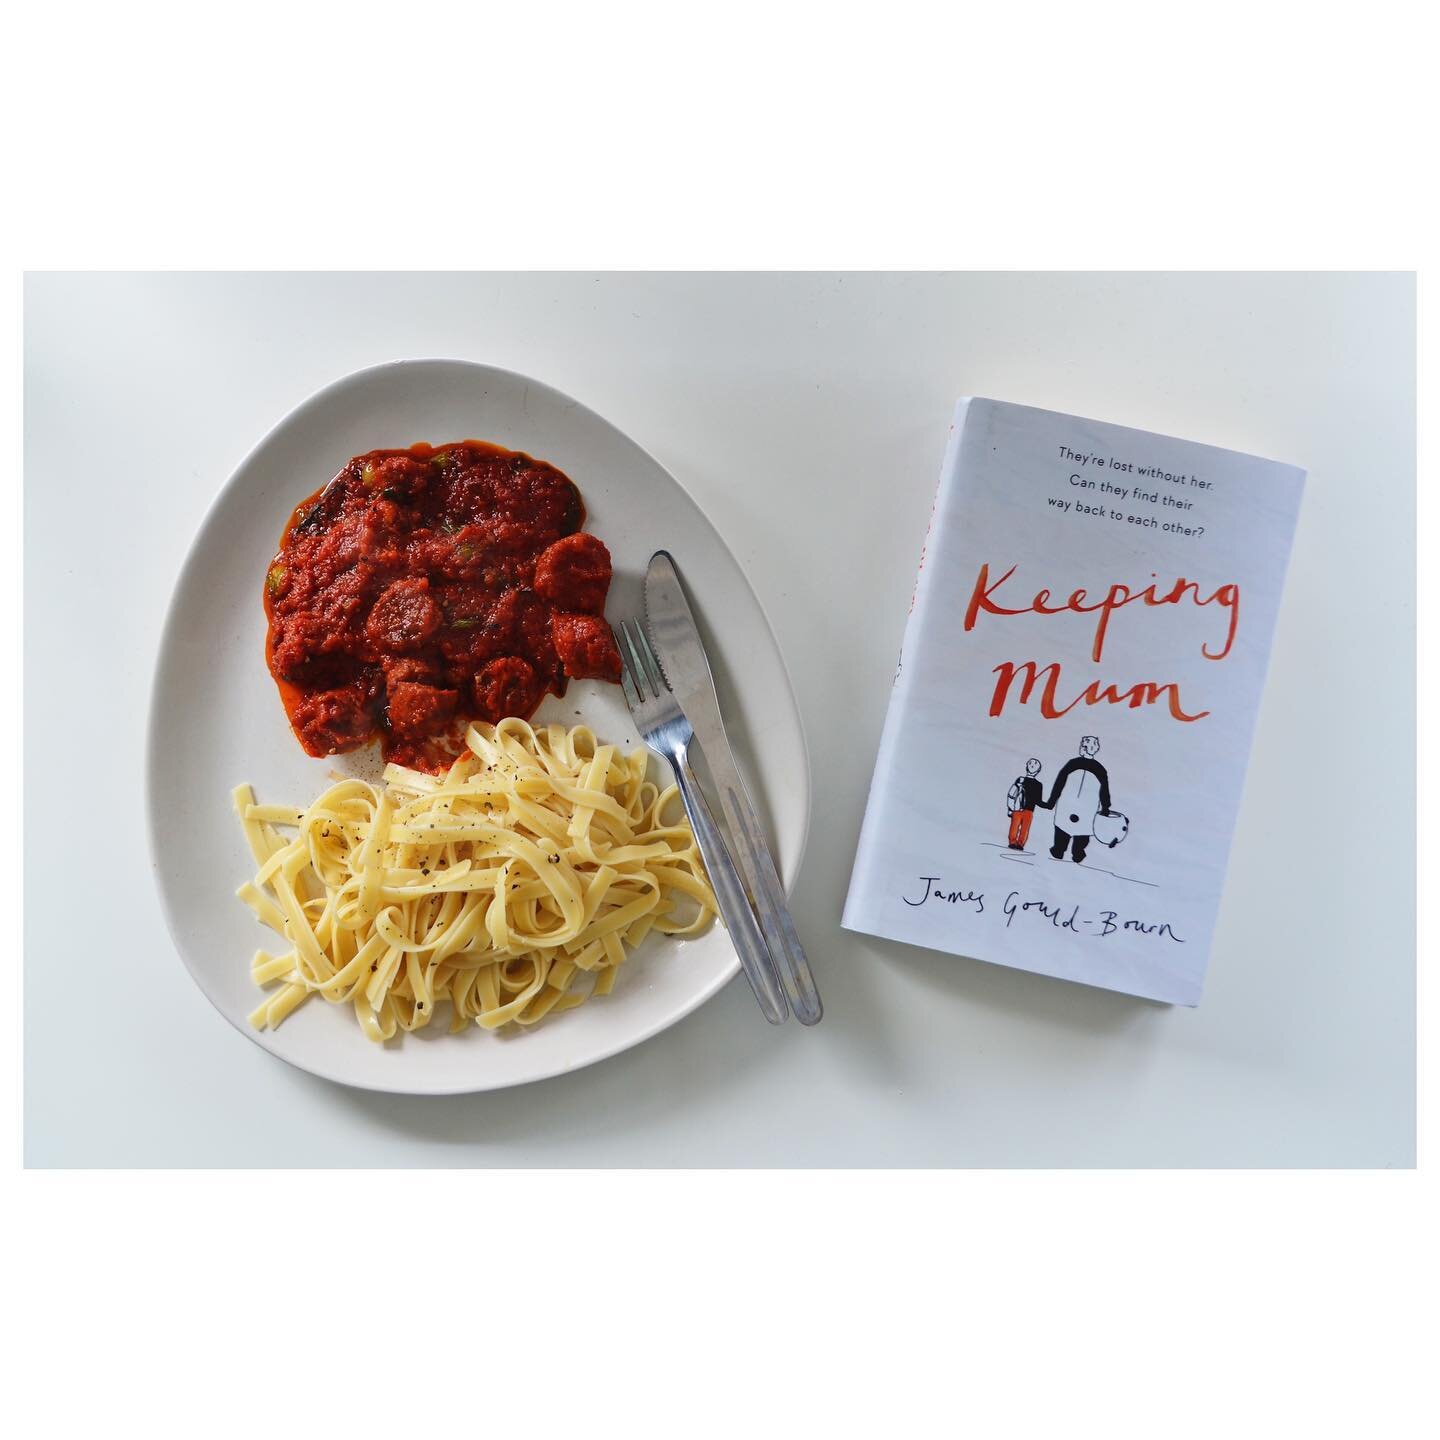 Two things I&rsquo;ve been really enjoying this week...⁣
⁣
James Gould-Bourn&rsquo;s (@jpgouldbourn) debut novel KEEPING MUM. Expertly-written, funny, and poignant, with a fantastic cast of characters. Overall an absolutely brilliant read! 👏 ⁣
⁣
And